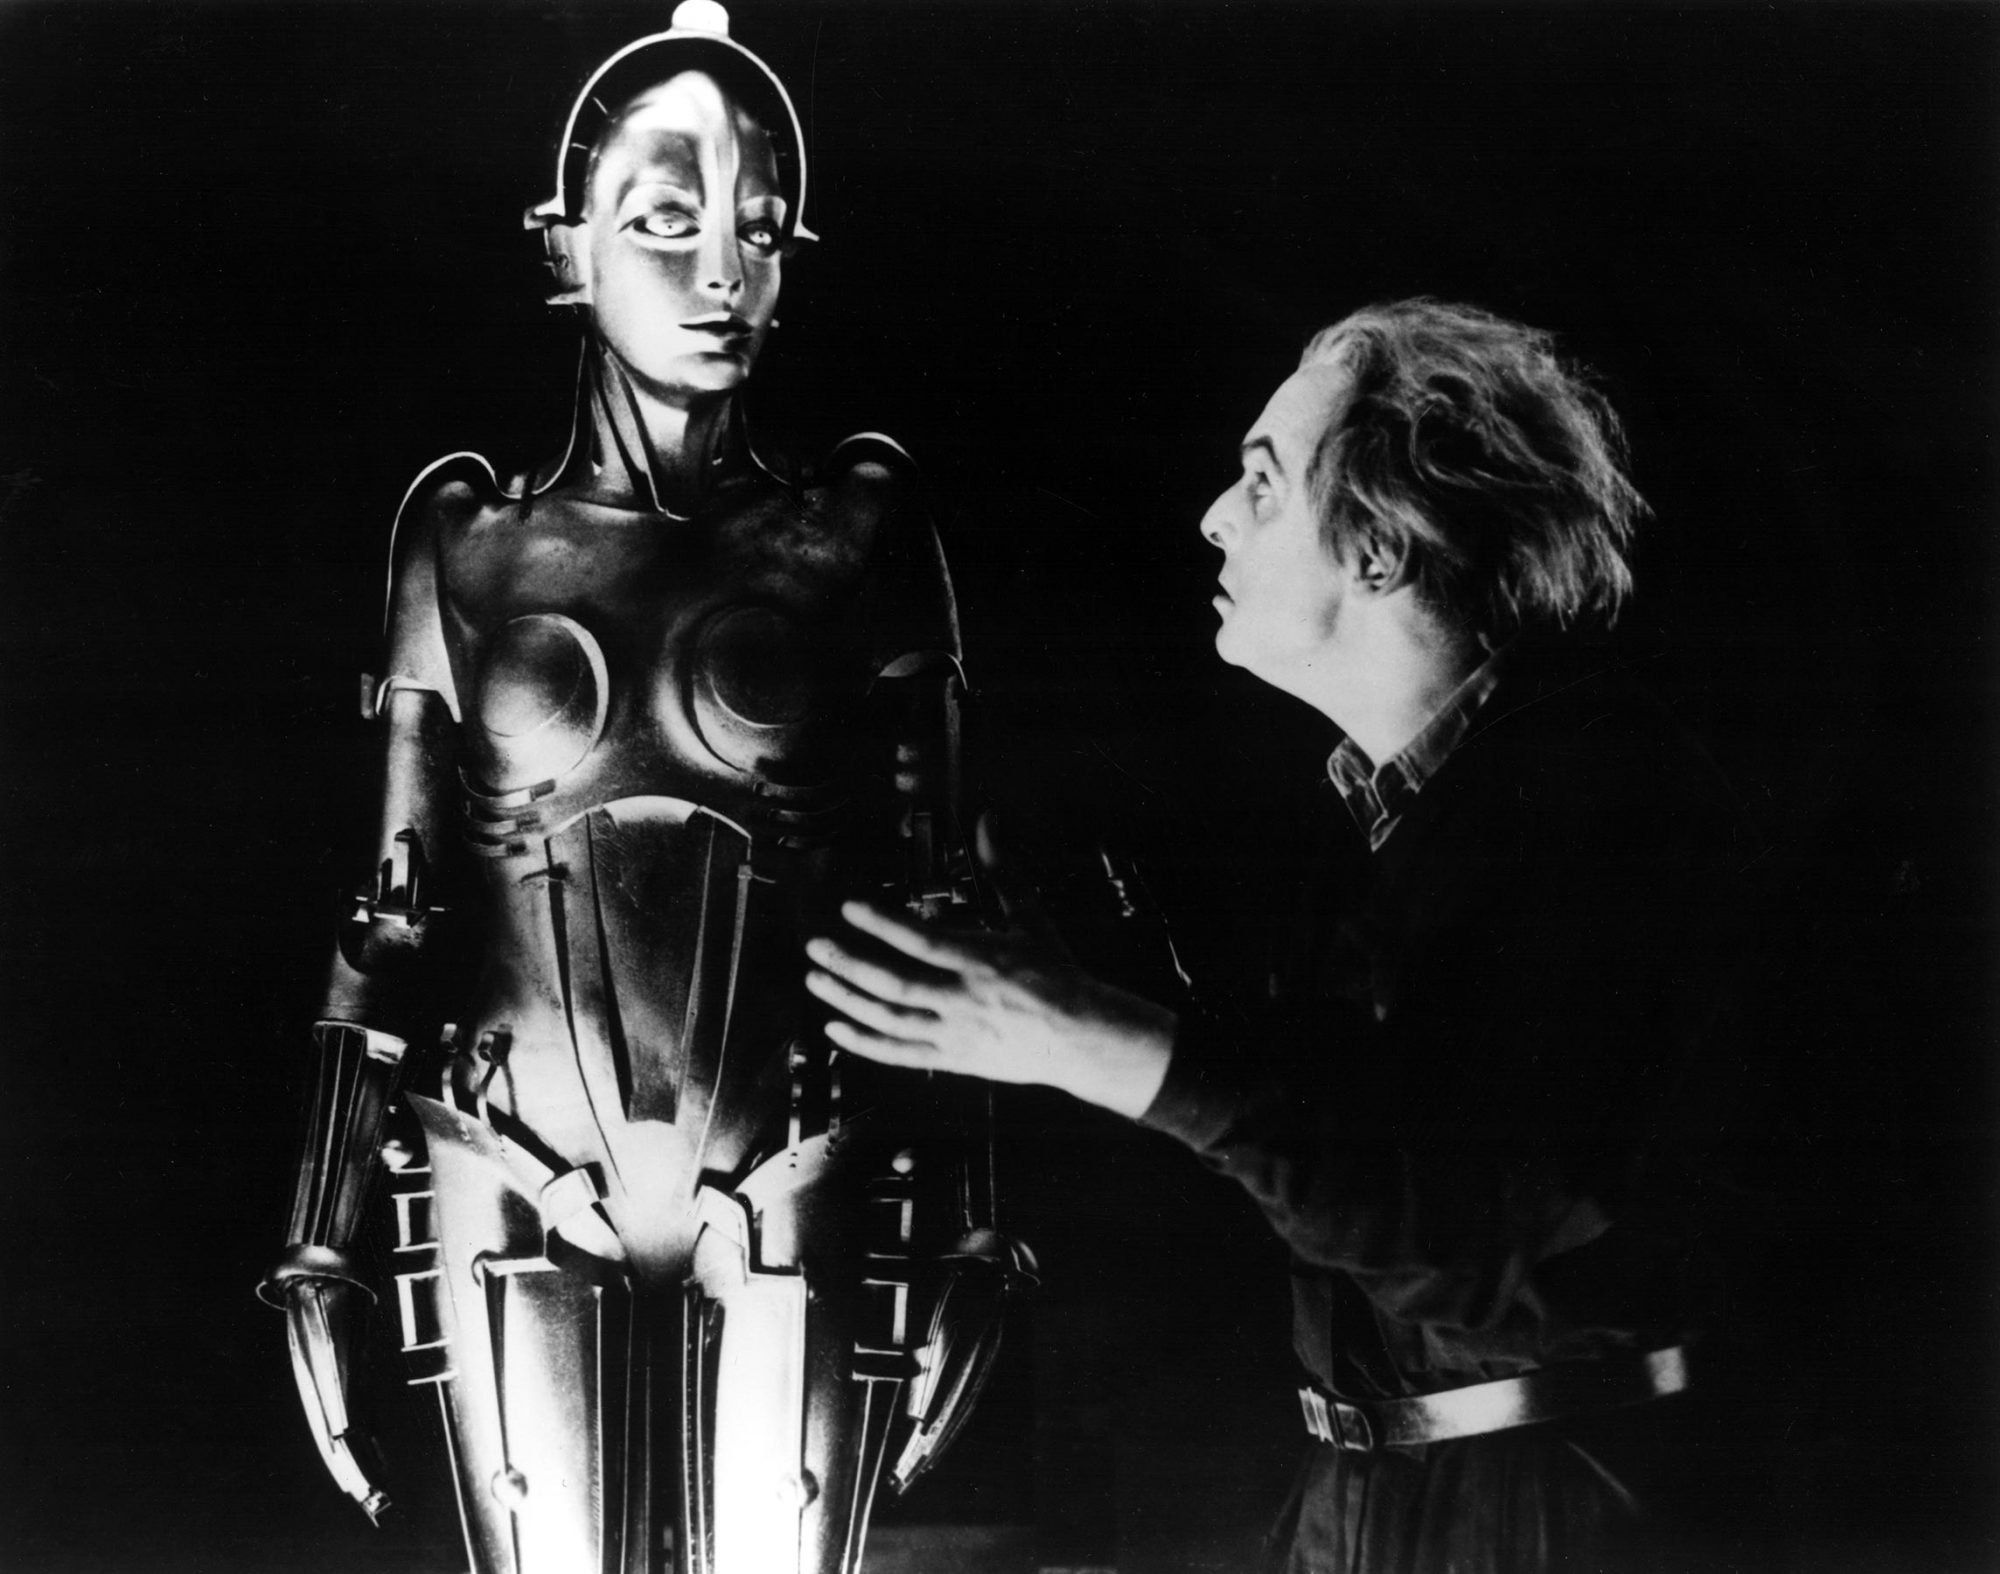 The 30 best sci-fi movies of all time